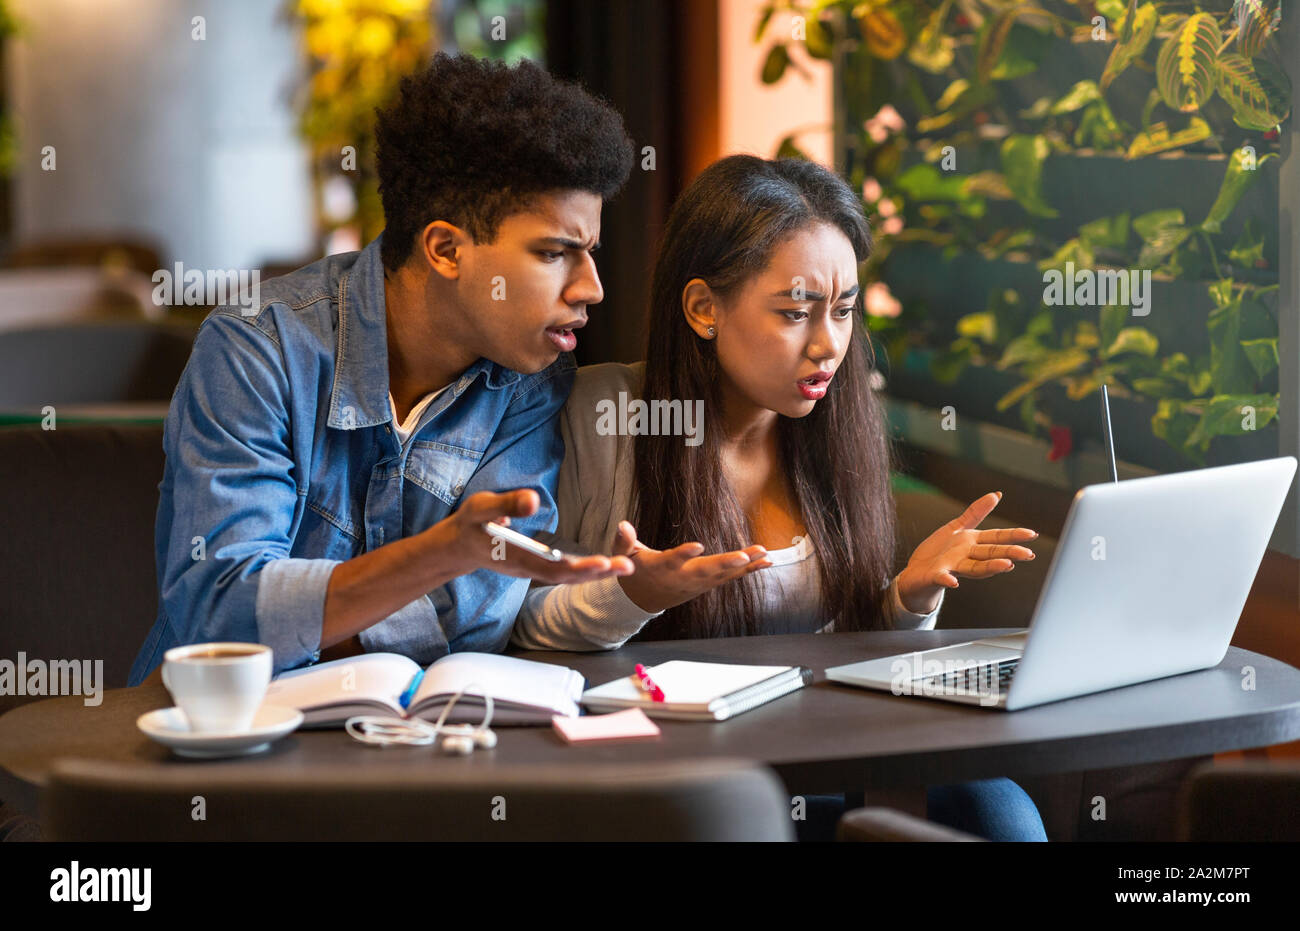 Angry students looking at laptop with furious faces Stock Photo